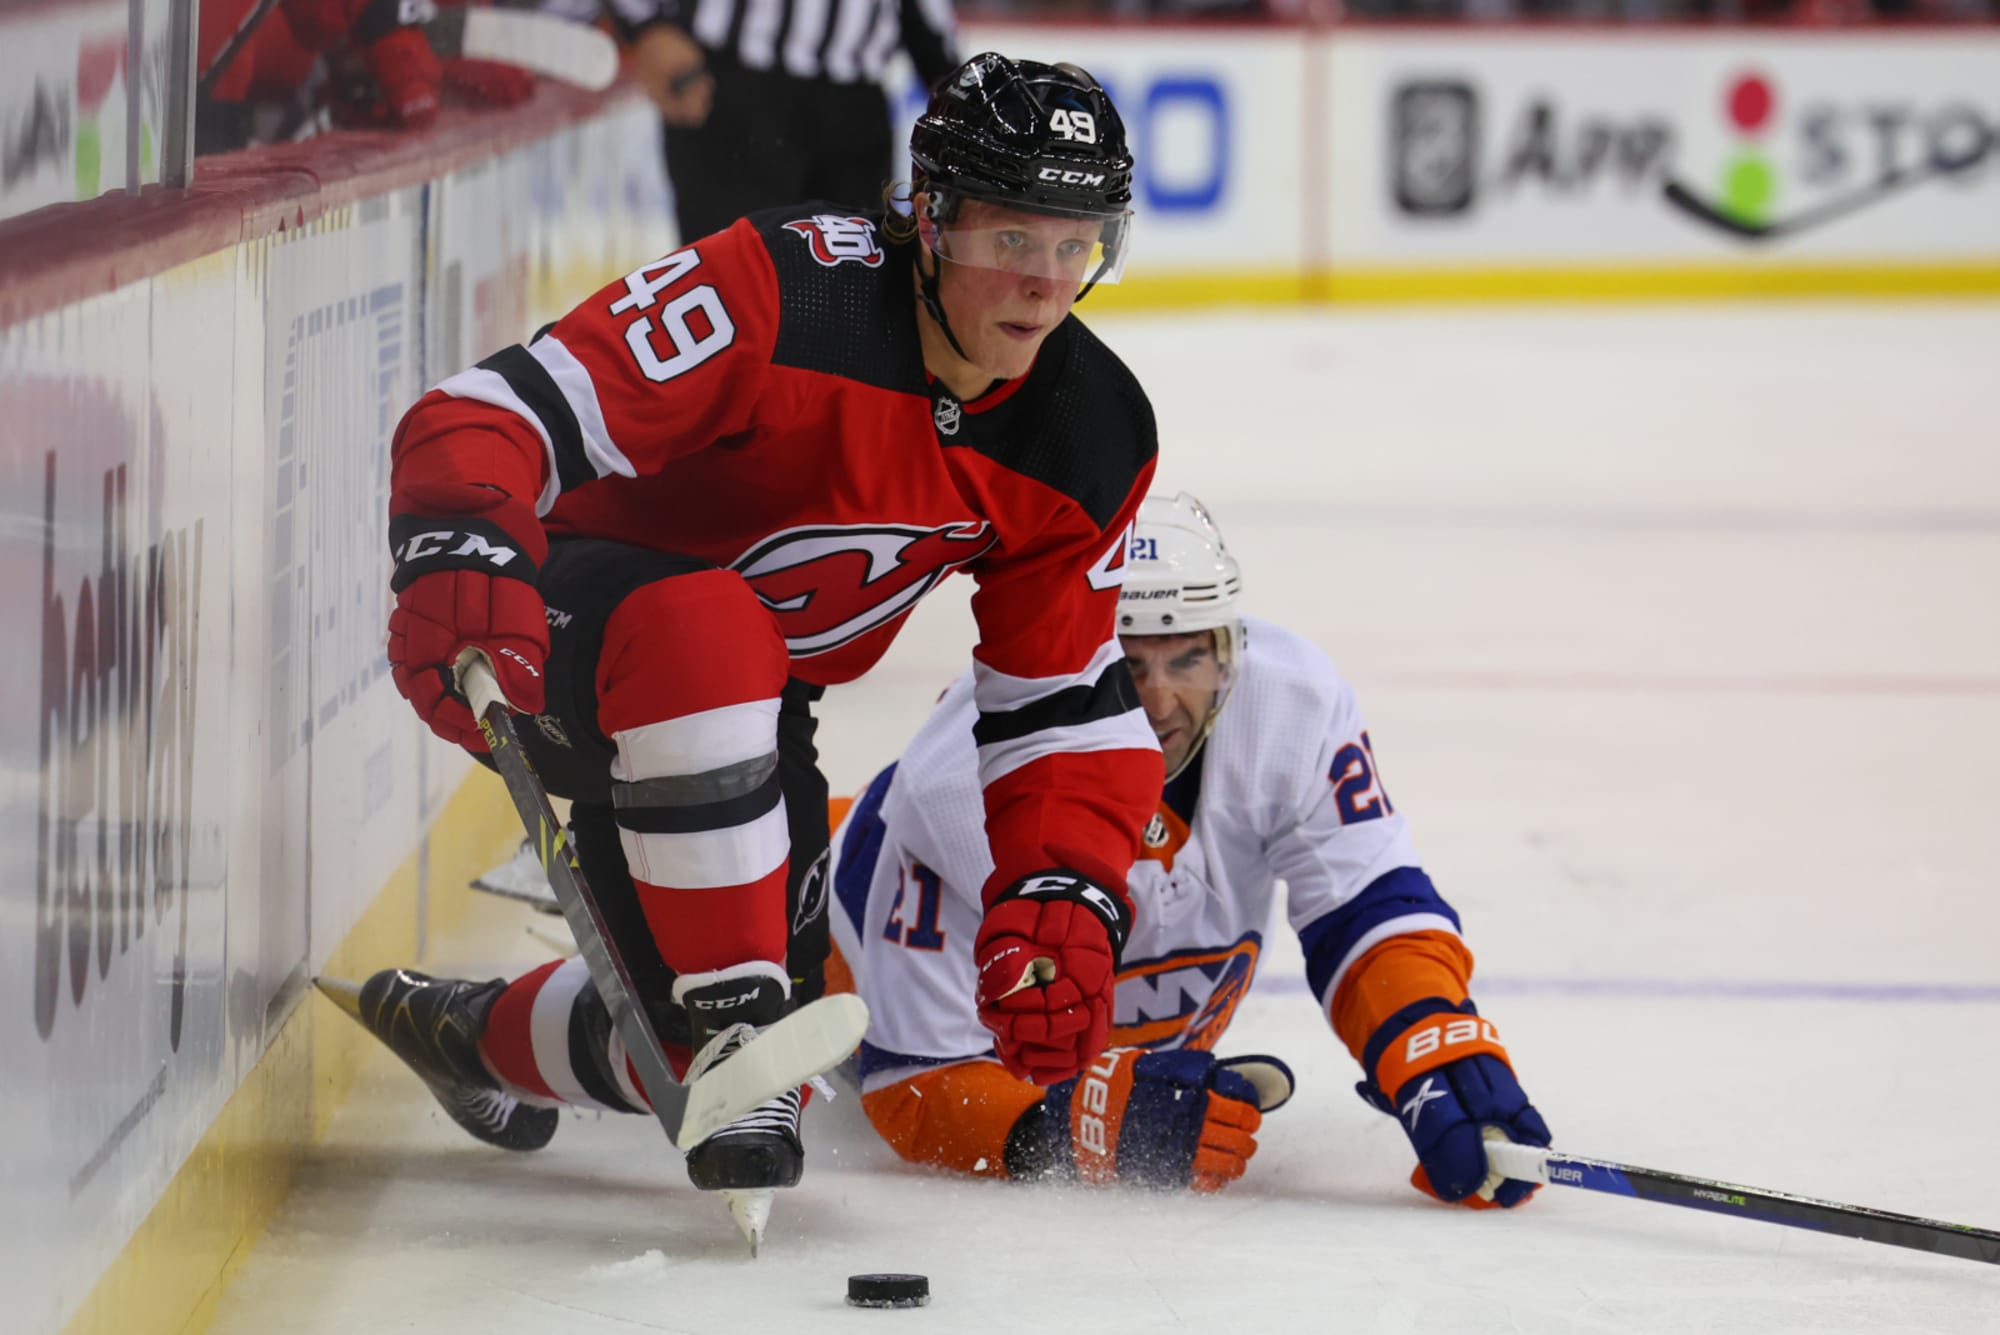 Devils' Fabian Zetterlund hopes to find role in N.J. as roster cuts loom 